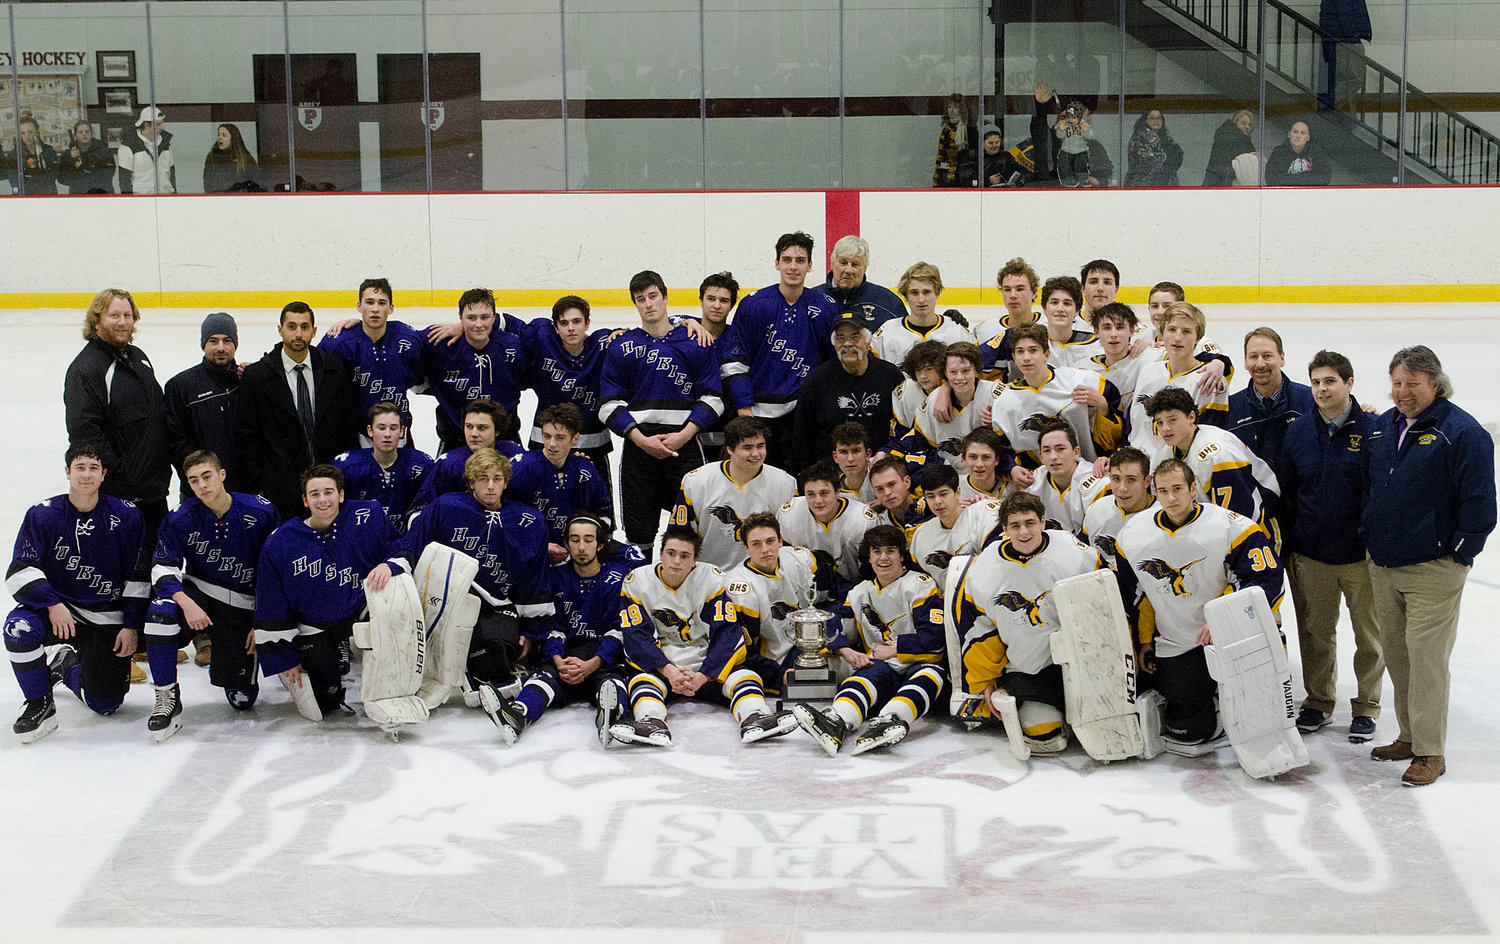 This year's JP Medeiros Jr. Memorial Cup hockey games will be played on Wednesday night, Jan. 8, at Portsmouth Abbey.